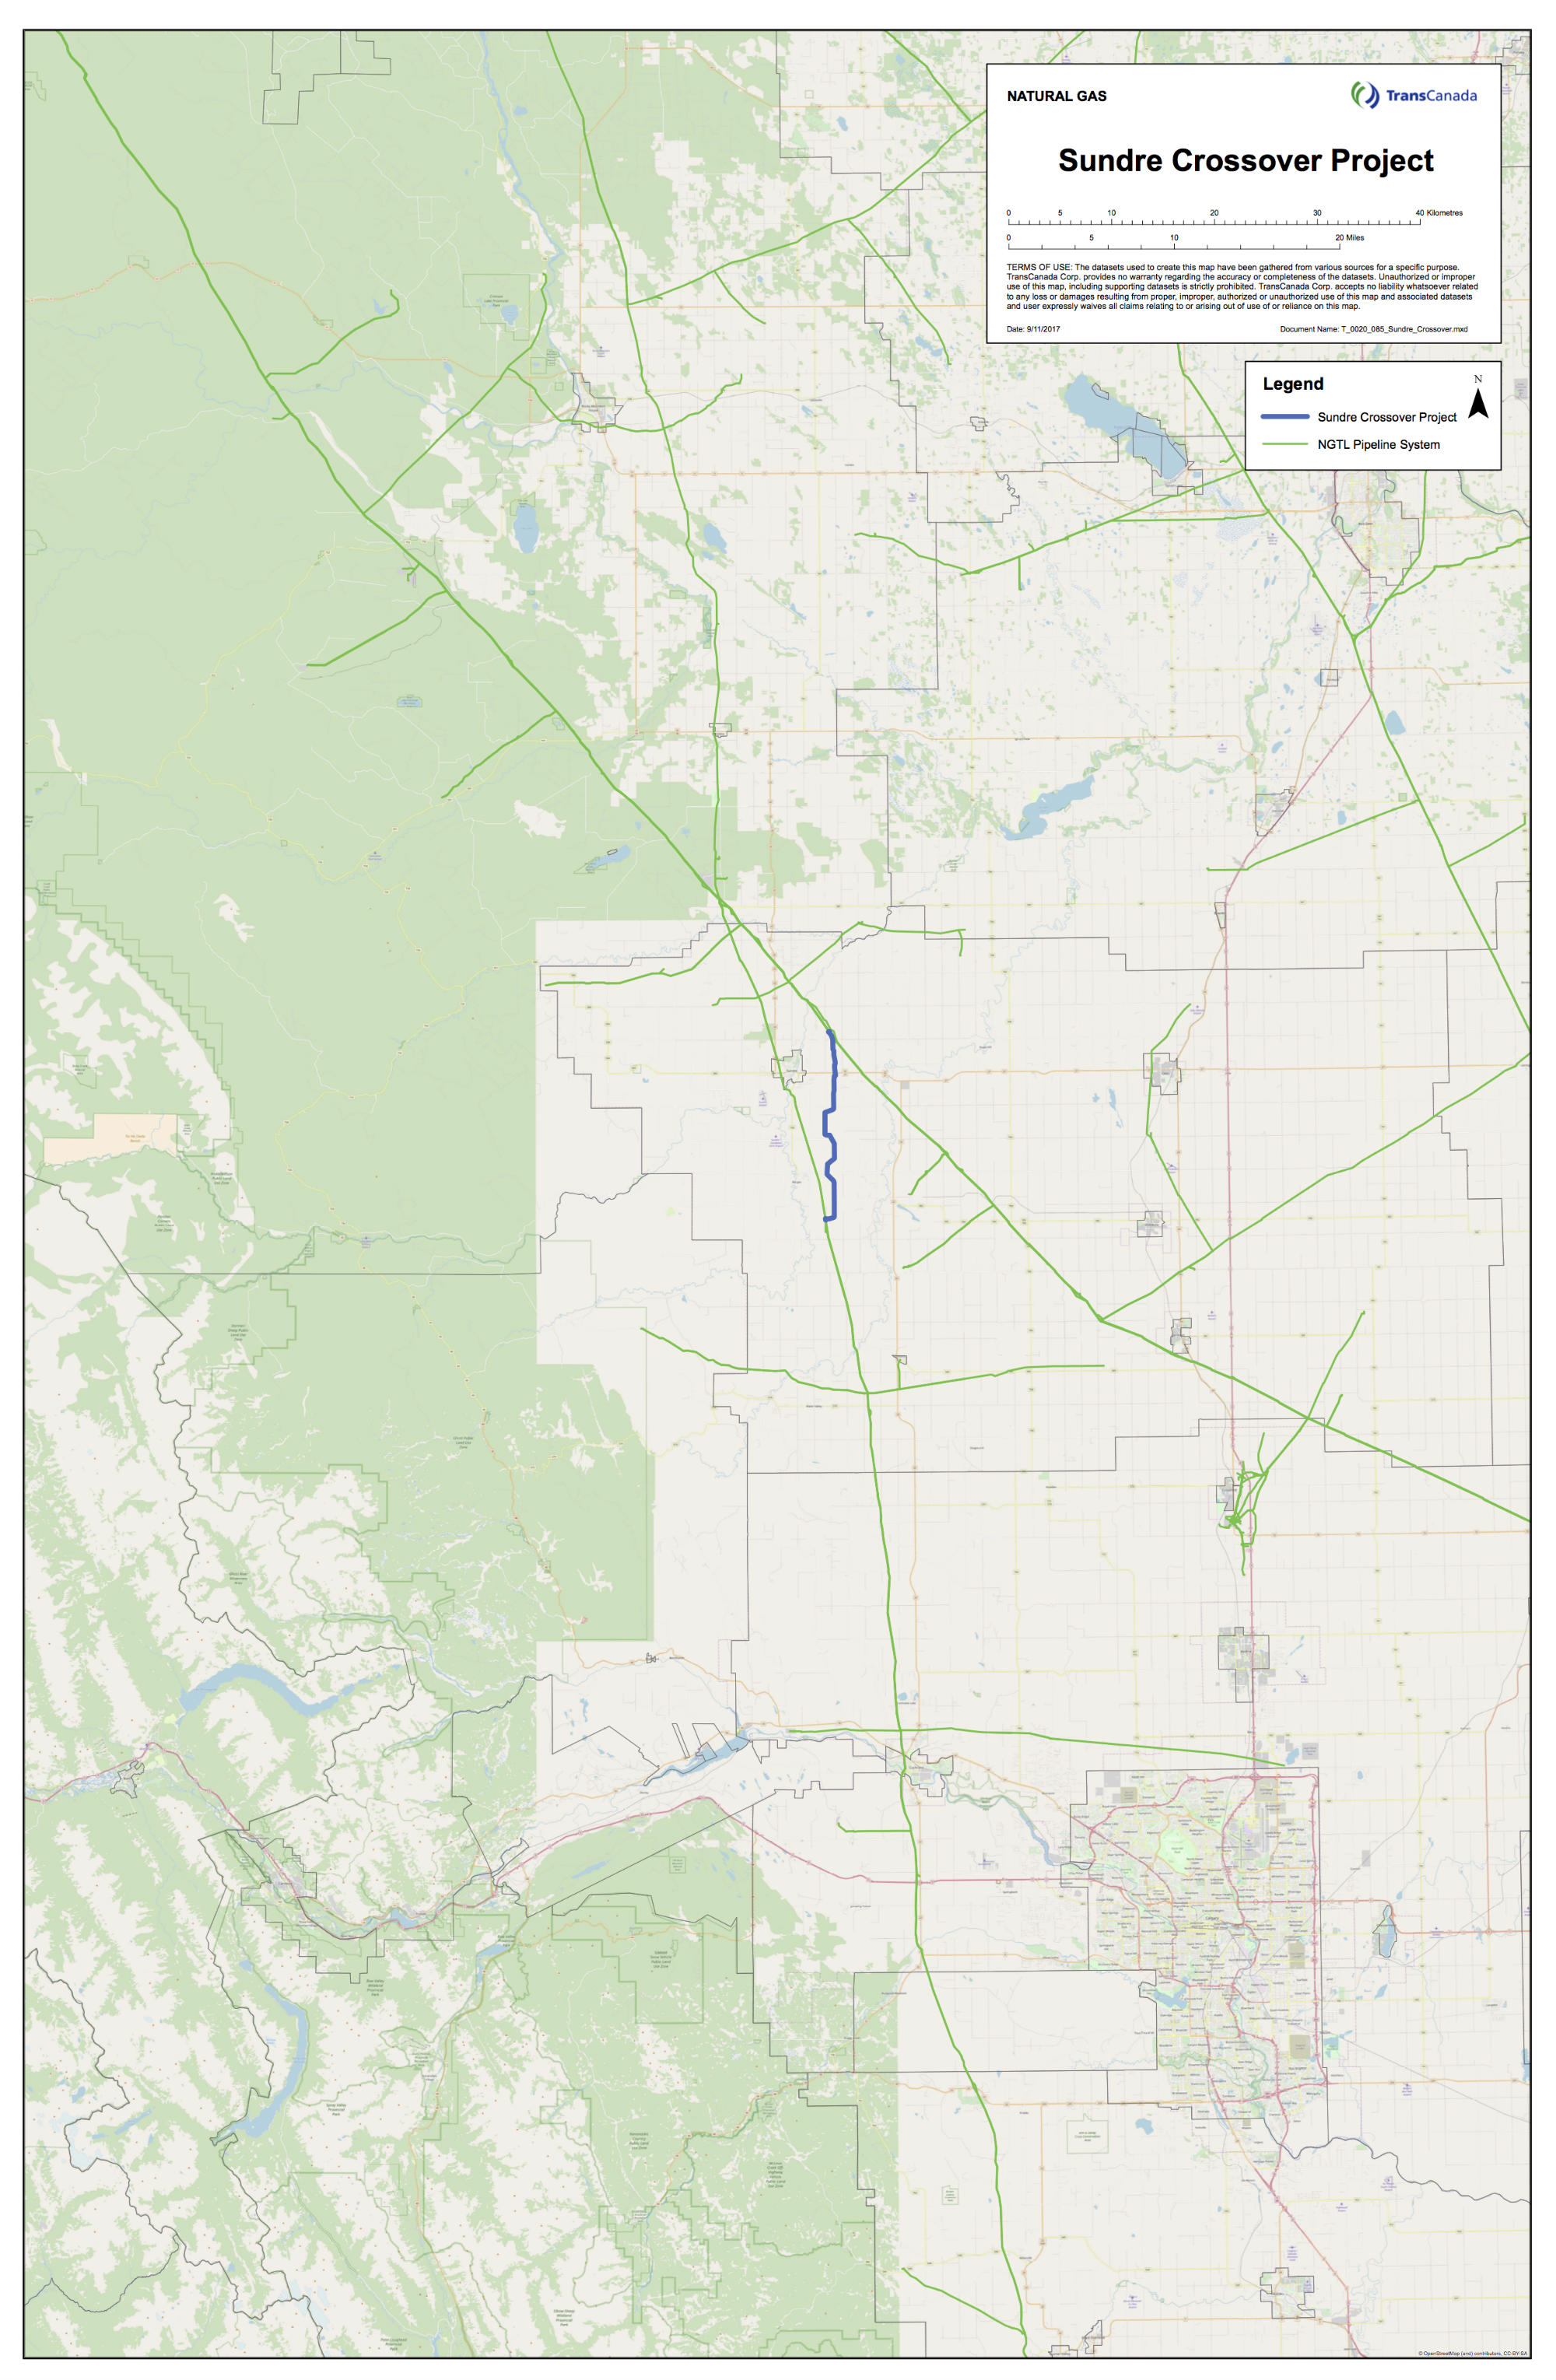 Sundre Crossover Project Map